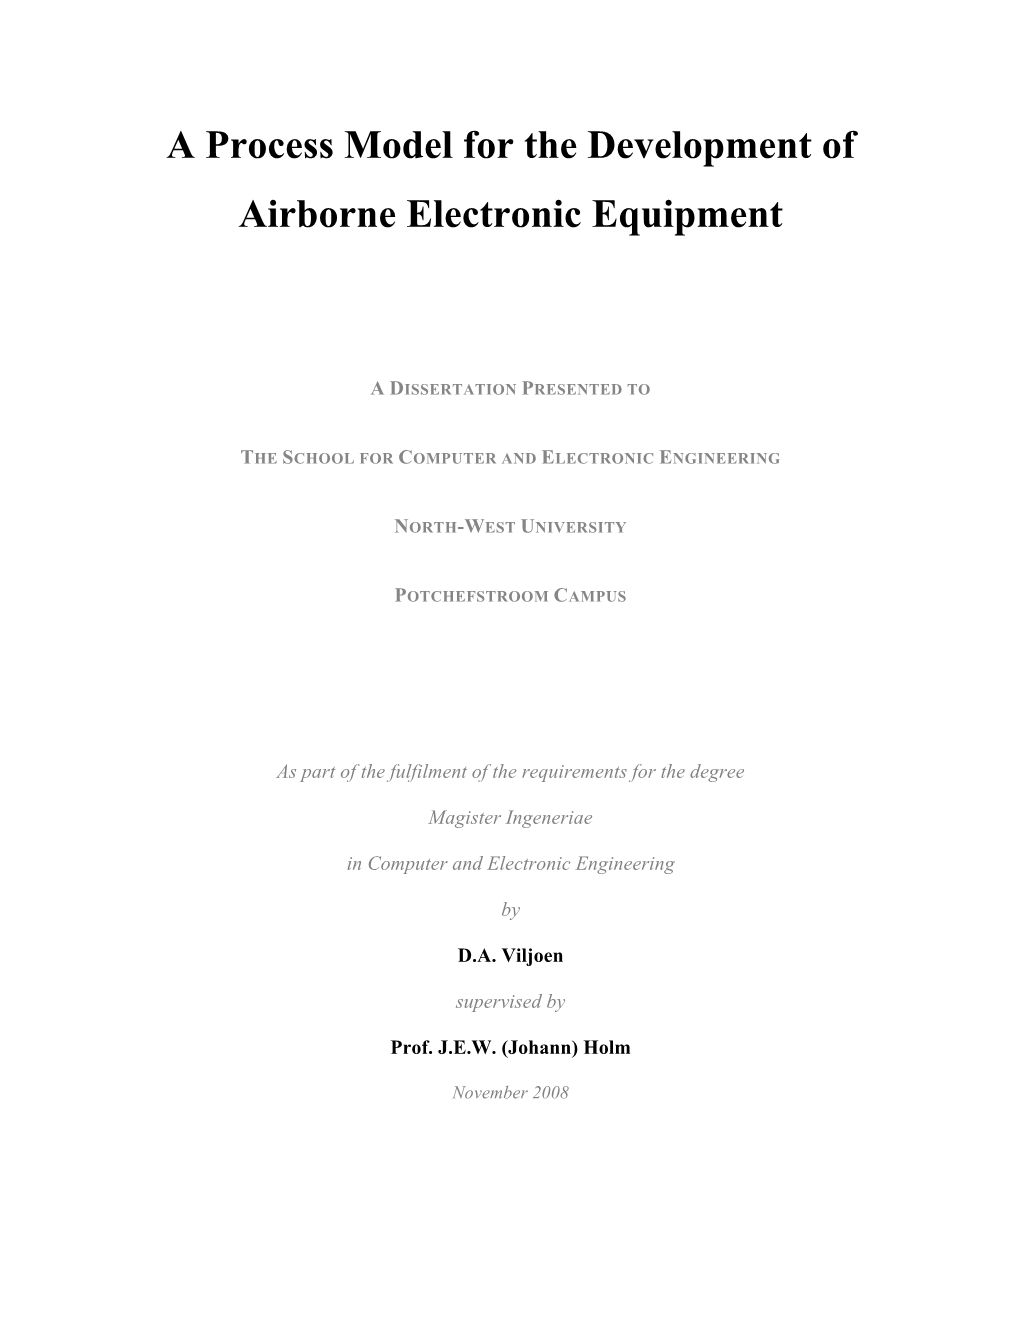 A Process Model for the Development of Airborne Electronic Equipment